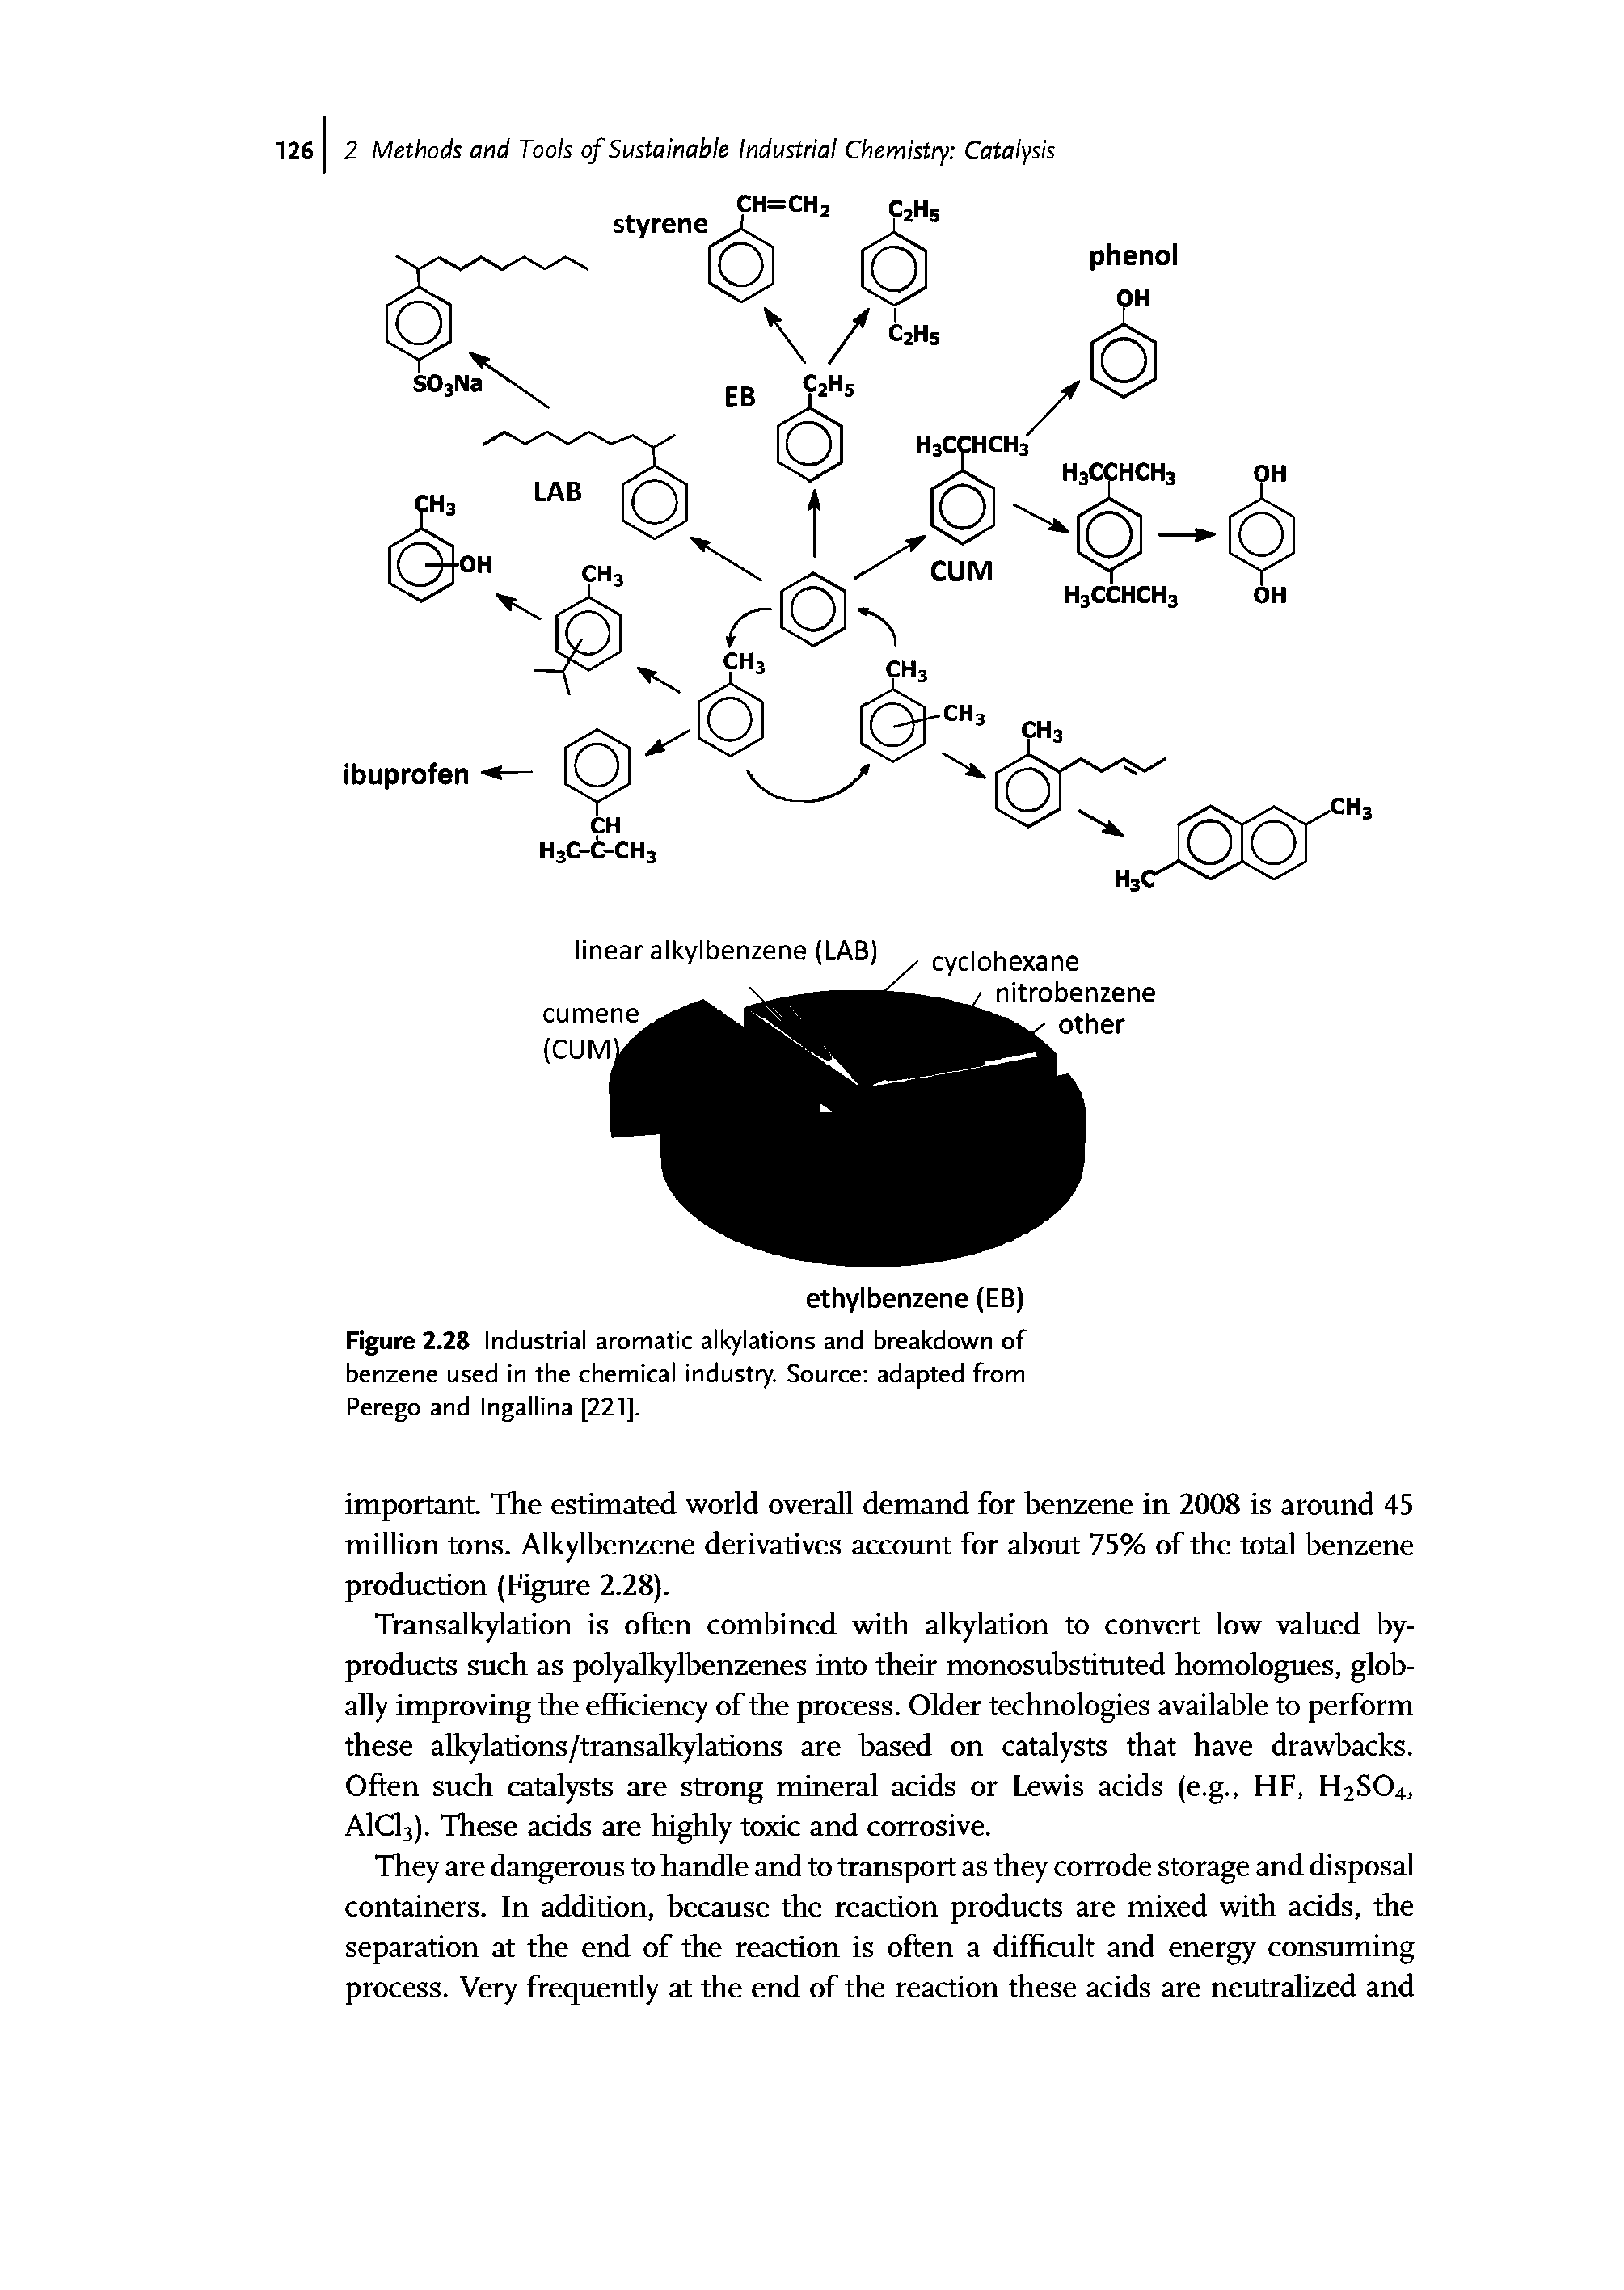 Figure 2.28 Industrial aromatic alkylations and breakdown of benzene used in the chemical industry. Source adapted from Perego and Ingallina [221],...